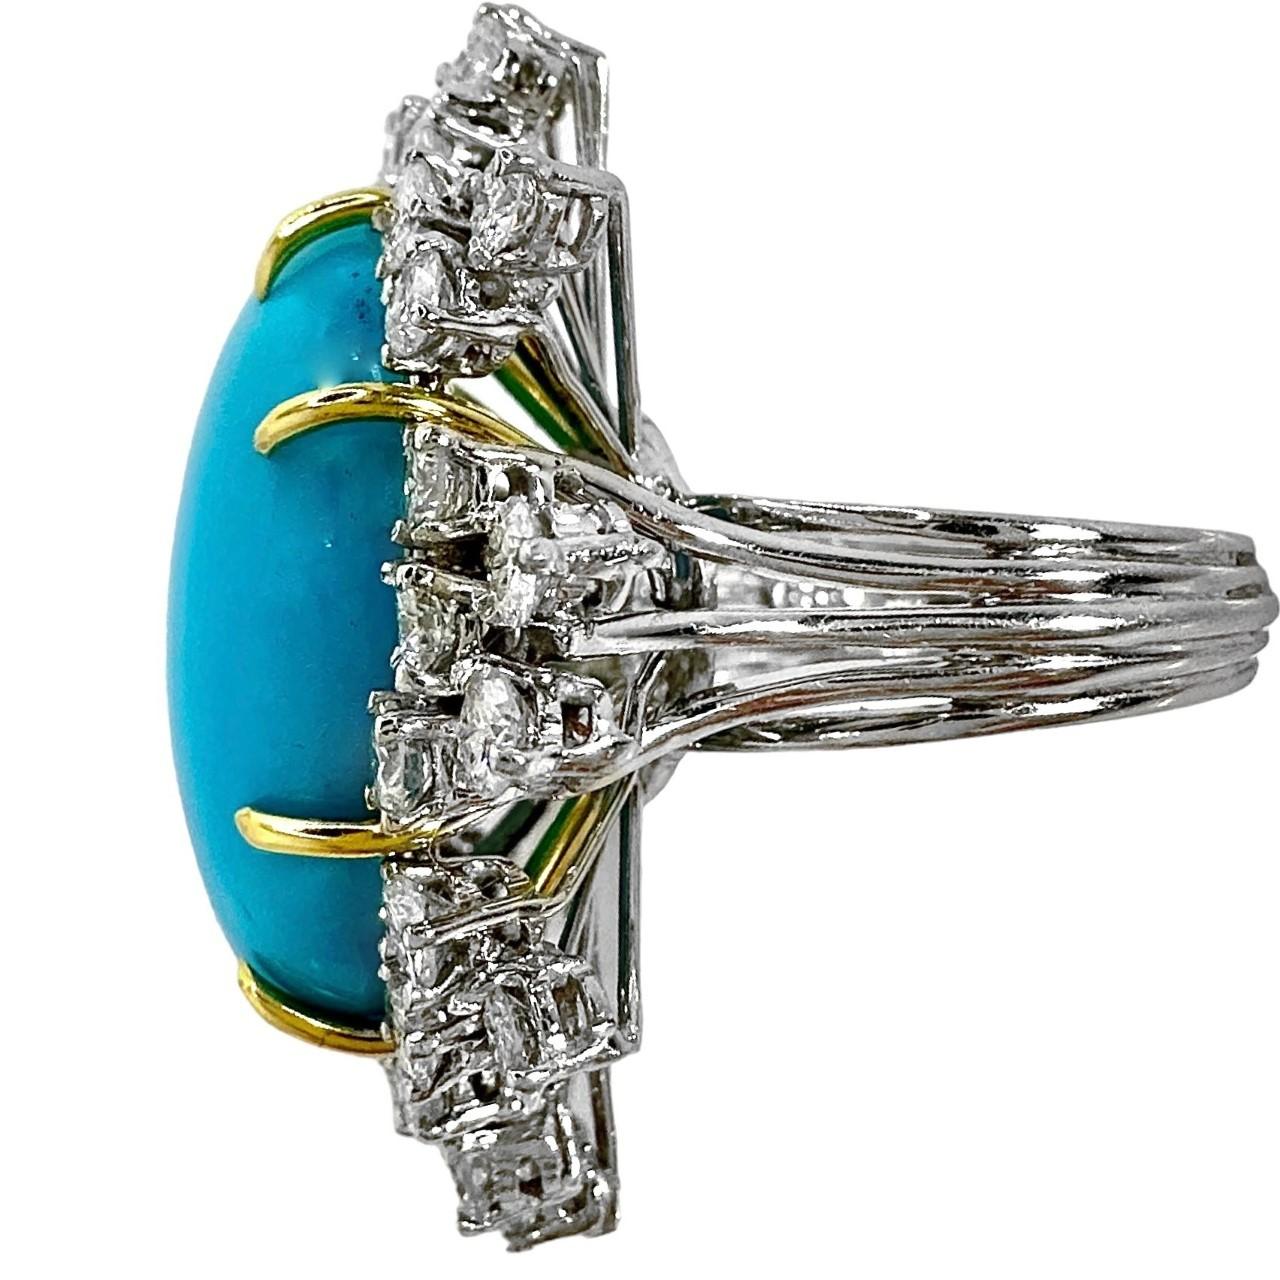 Brilliant Cut Magnificent Mid-20th Century Turquoise, Diamond and Platinum Cocktail Ring For Sale